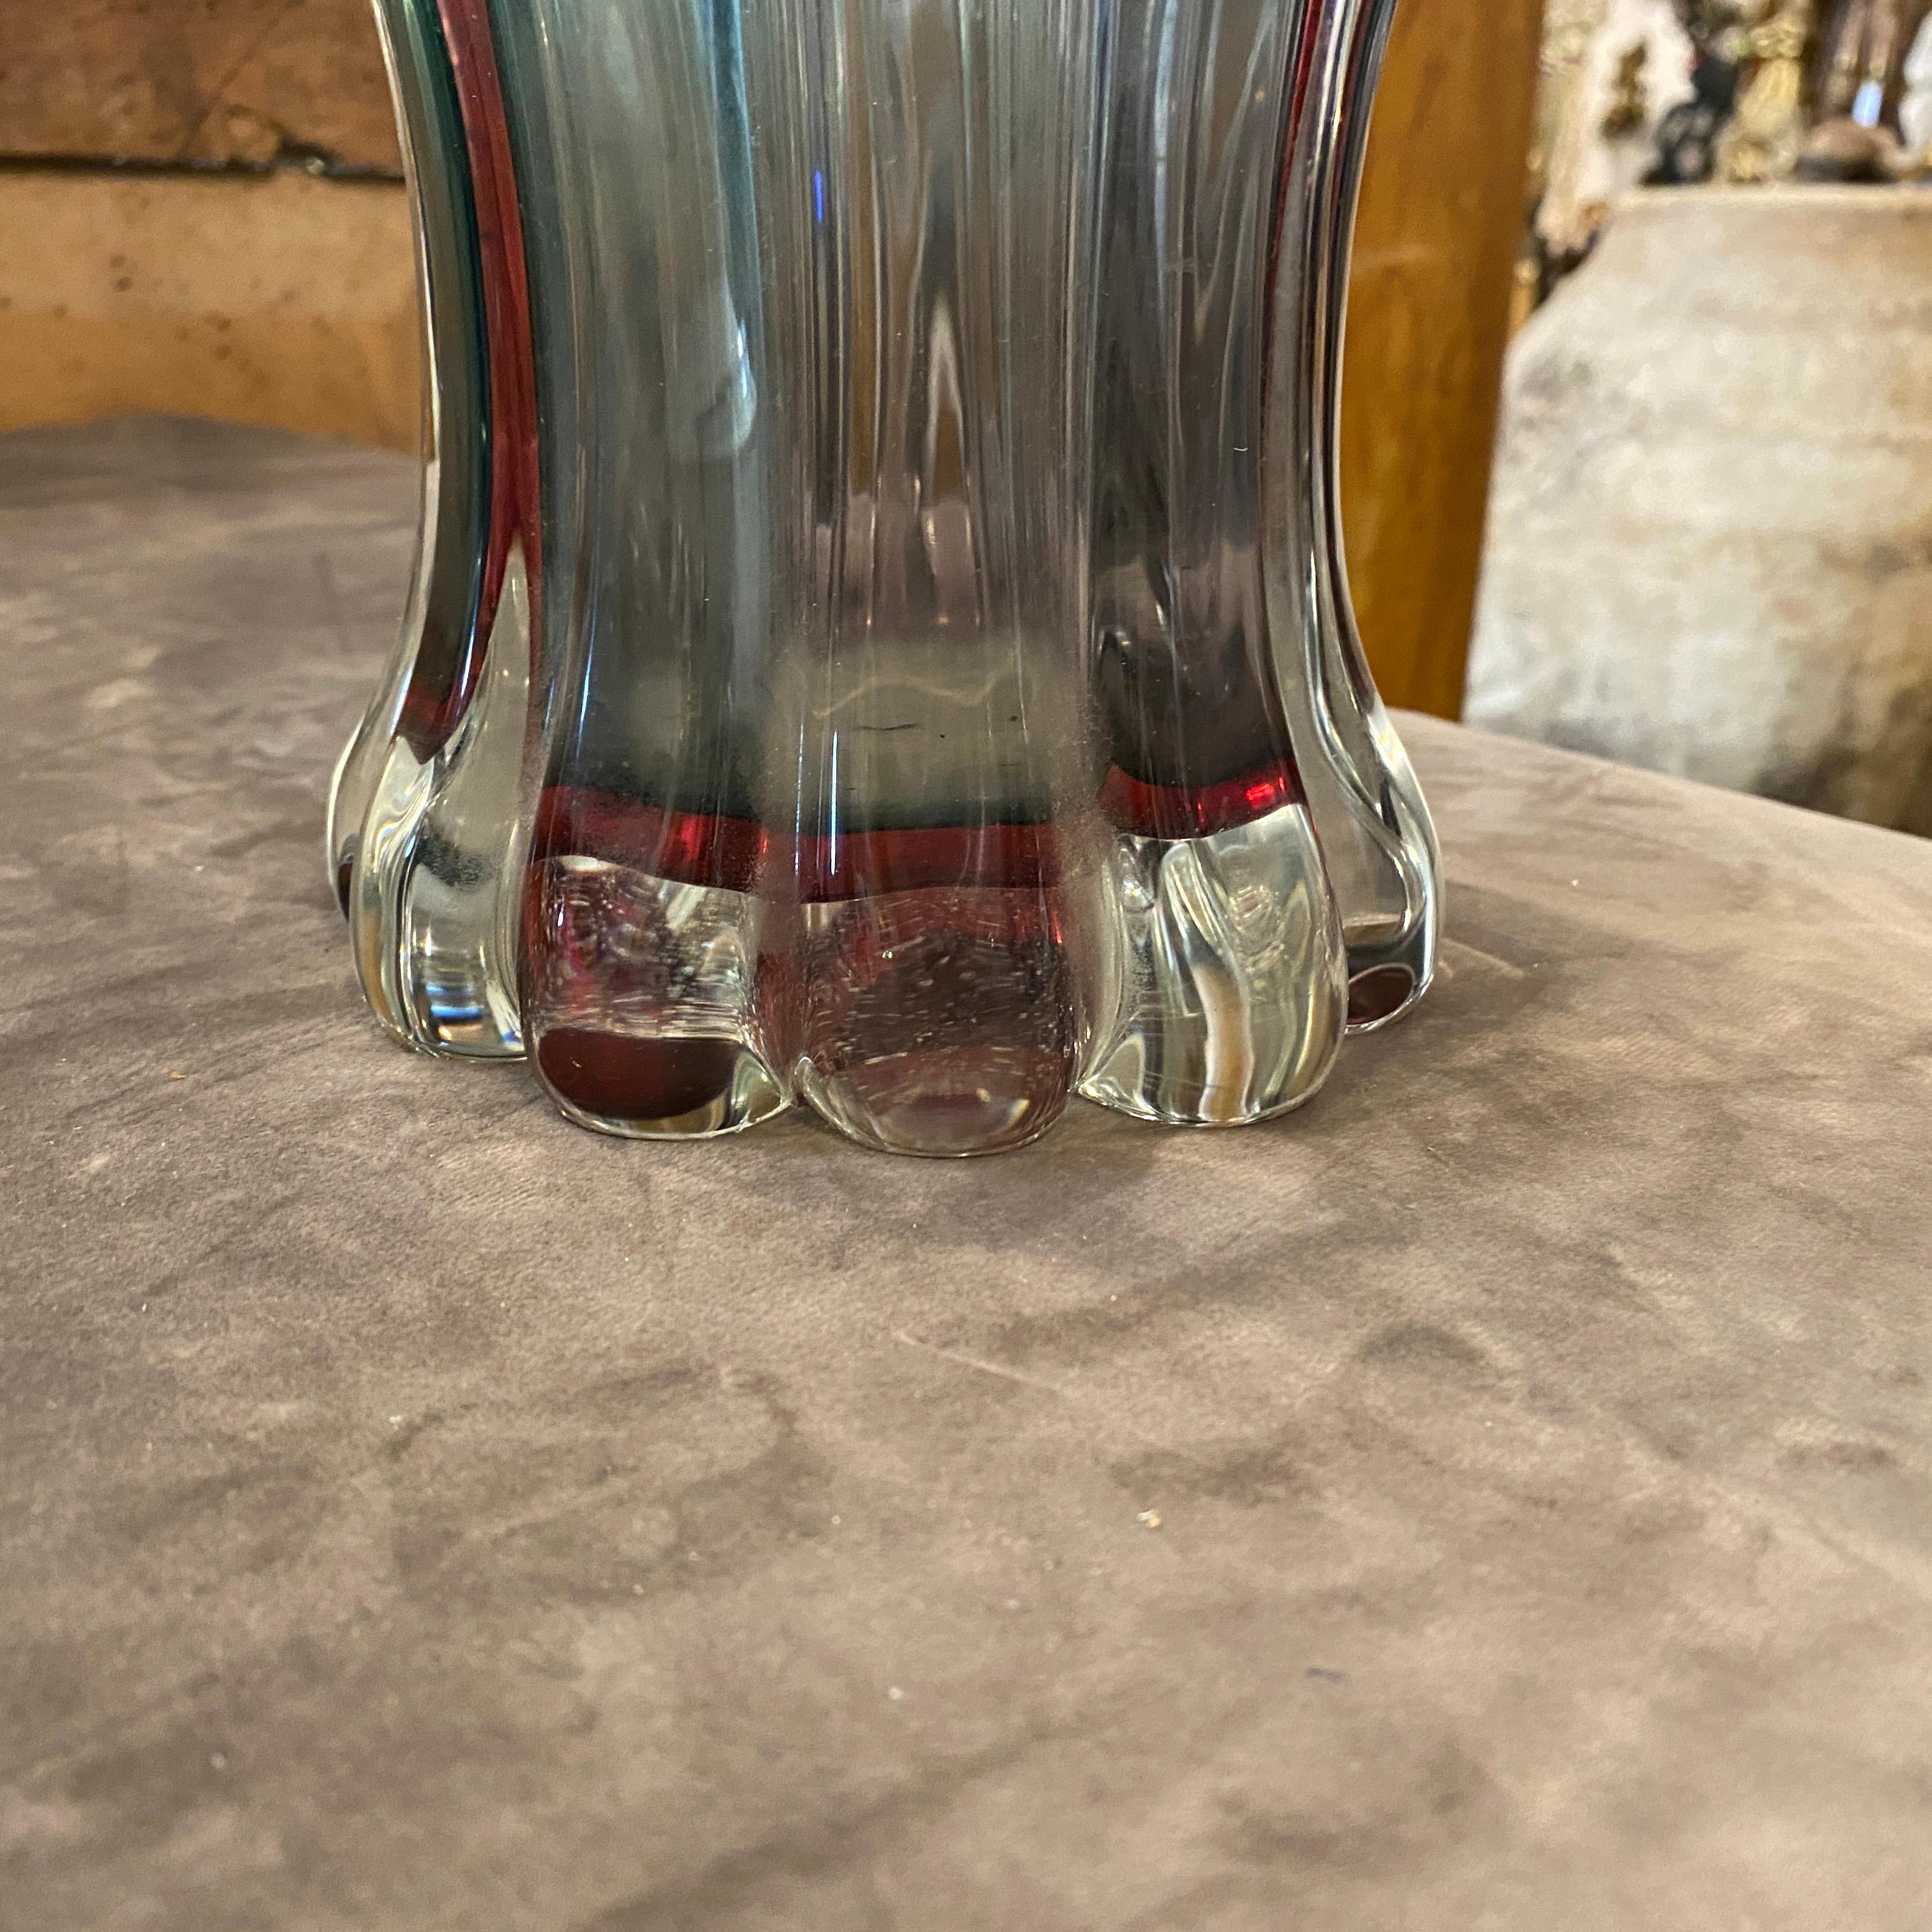 It's a purple and blue murano glass vase designed and manufactured in Italy by Flavio Poli for Seguso. It's in perfect conditions. This Vase is a striking and collectible piece of Italian glass art that embodies the distinctive features of Murano